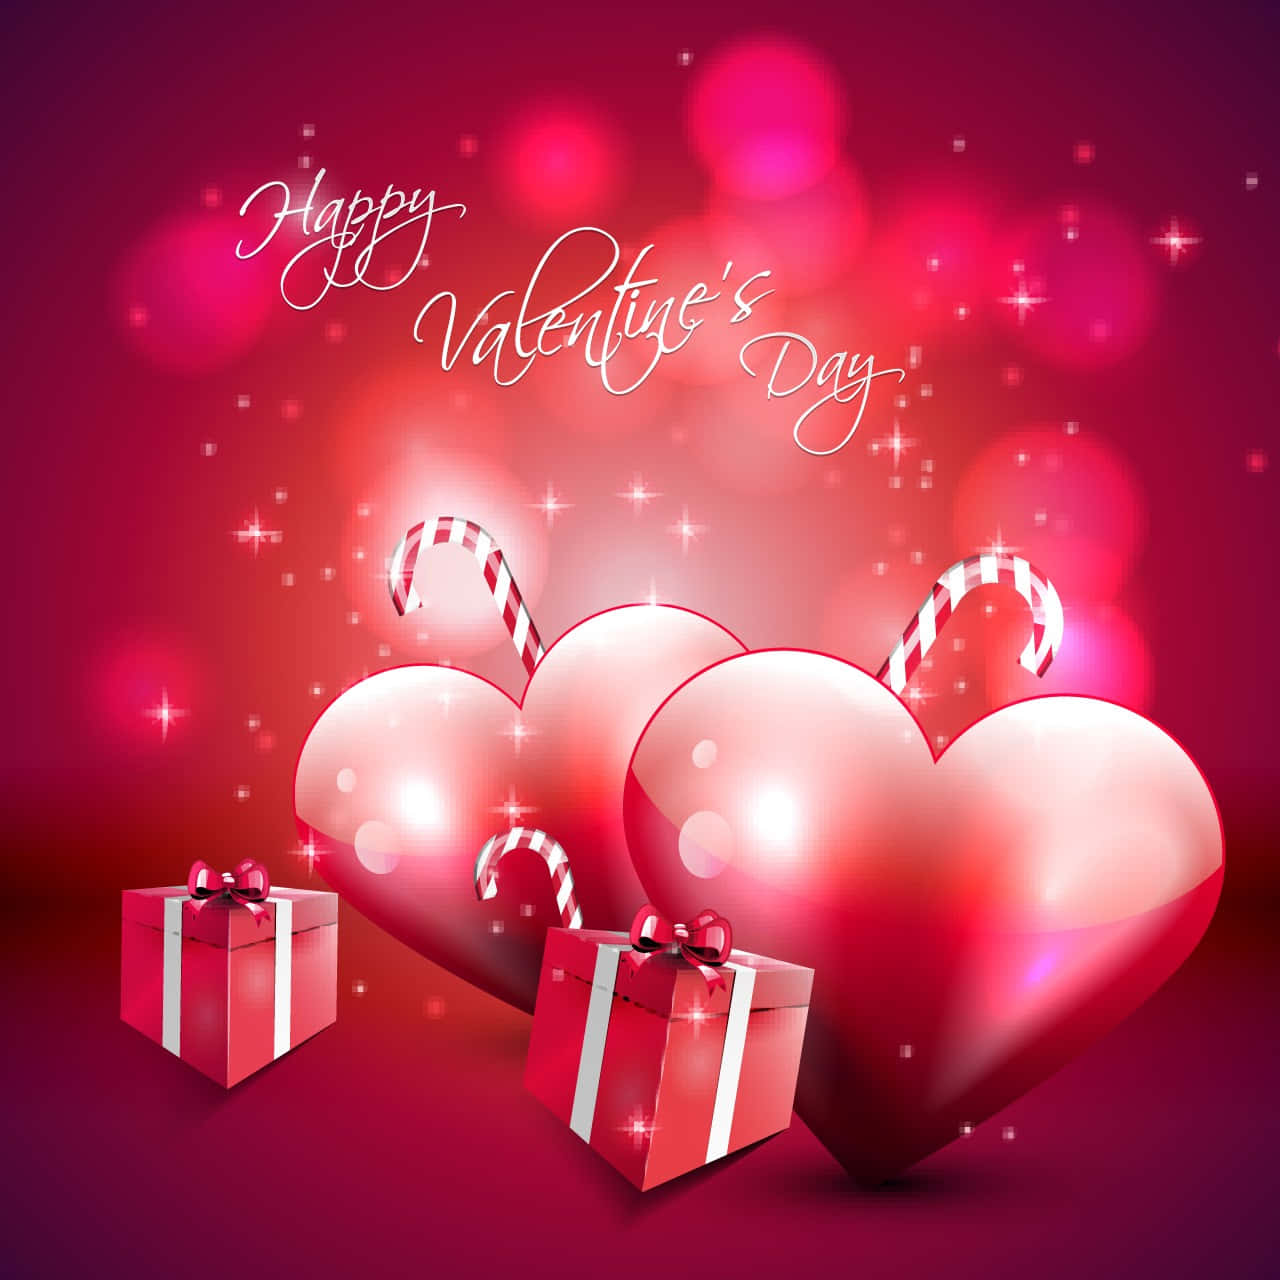 Wishing you a Happy Valentines Day!